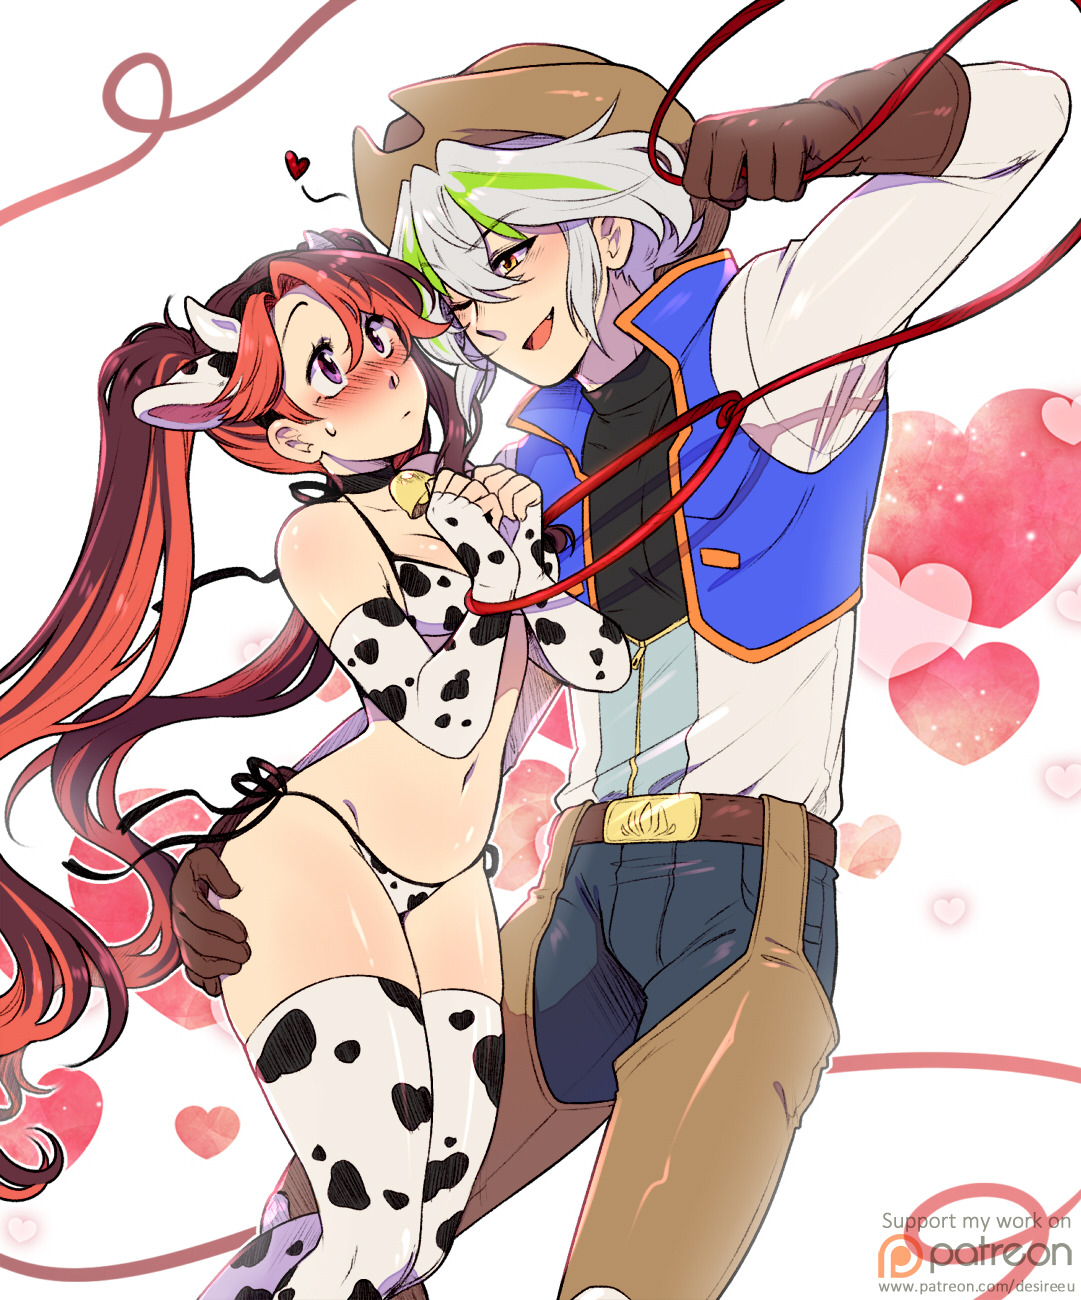 Happy Valentine’s Day and Lunar New Year! ♥ I’m sorry, I couldn’t resist the cowkini x,D
Every cowgirl needs a cowboy, and Zarc seems to have his own weird take on the red lazo string of fate…